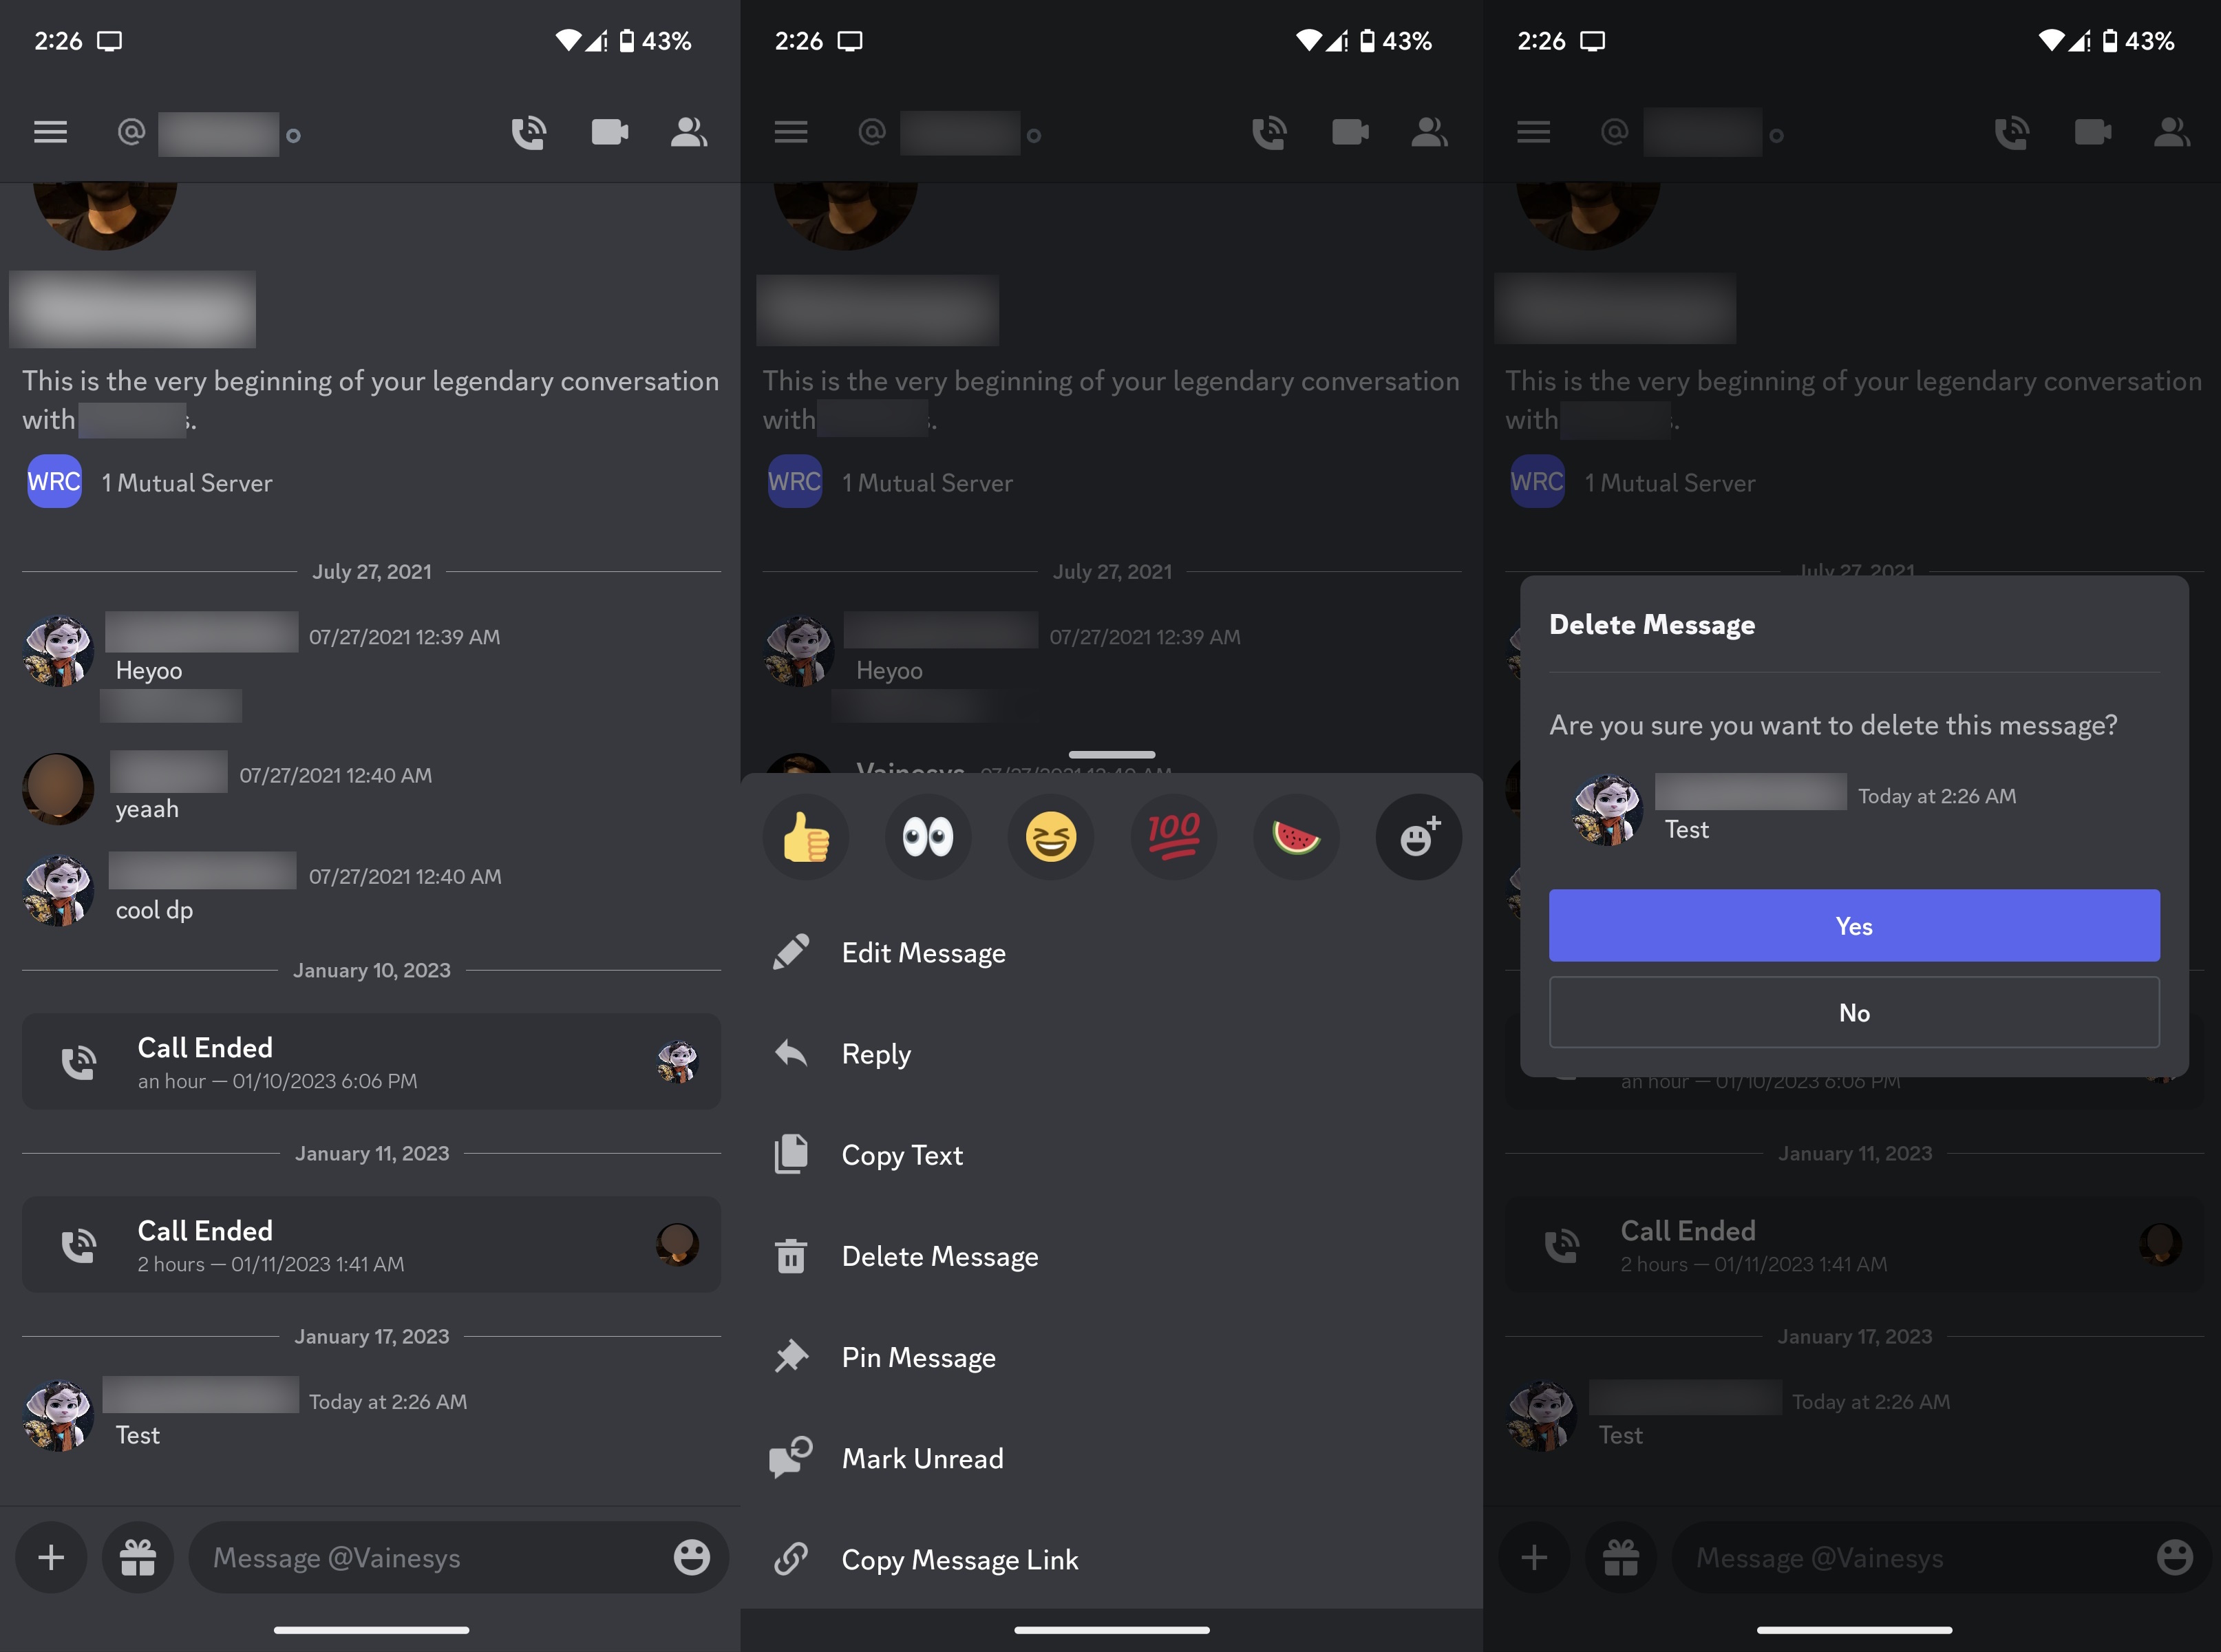 How to delete messages just for yourself on Discord